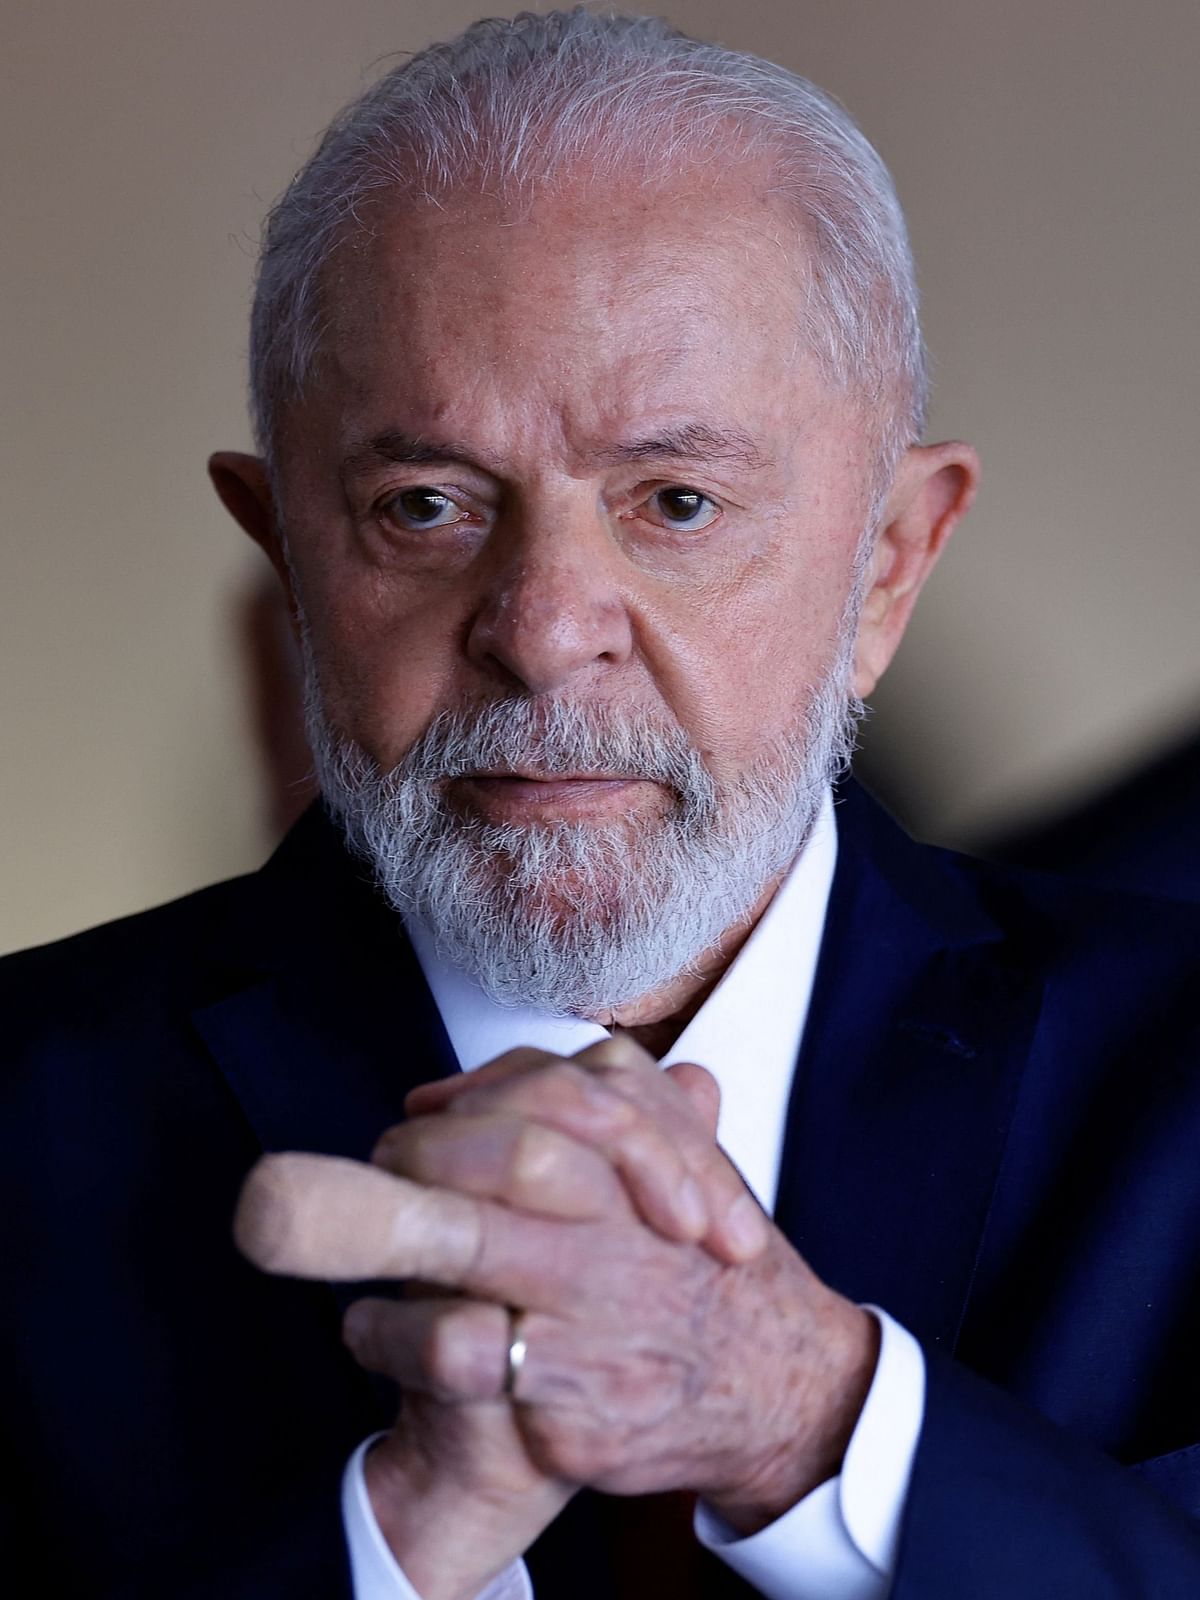 Brazilian President Luiz Inacio Lula da Silva is another influential leader who will attend the G7 summit in Italy.